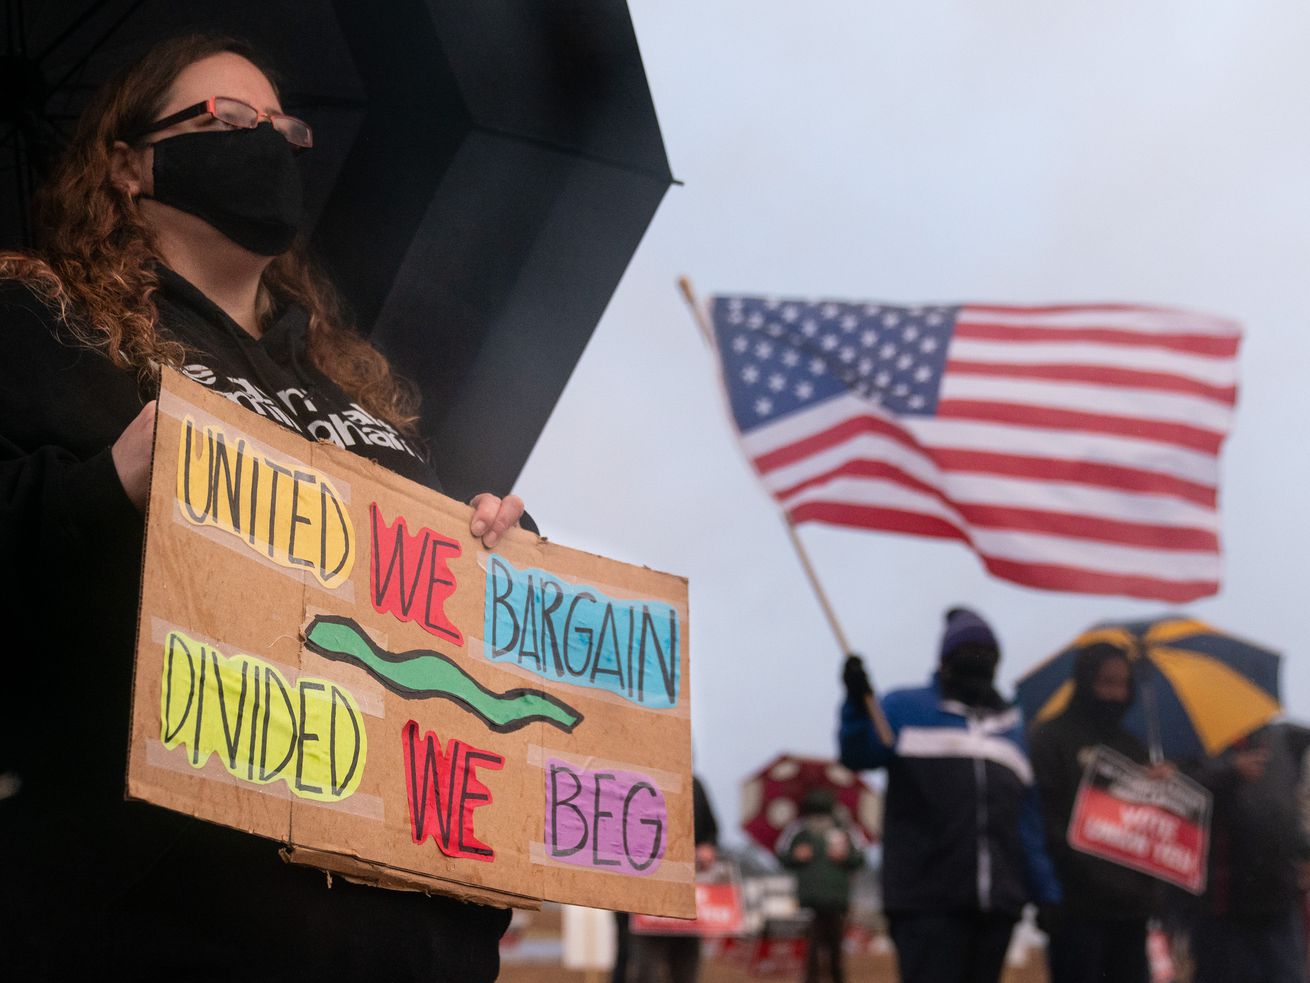 A protester holds a sign near Amazon’s Bessemer, Alabama, warehouse that reads, “United we bargain, divided we beg.”